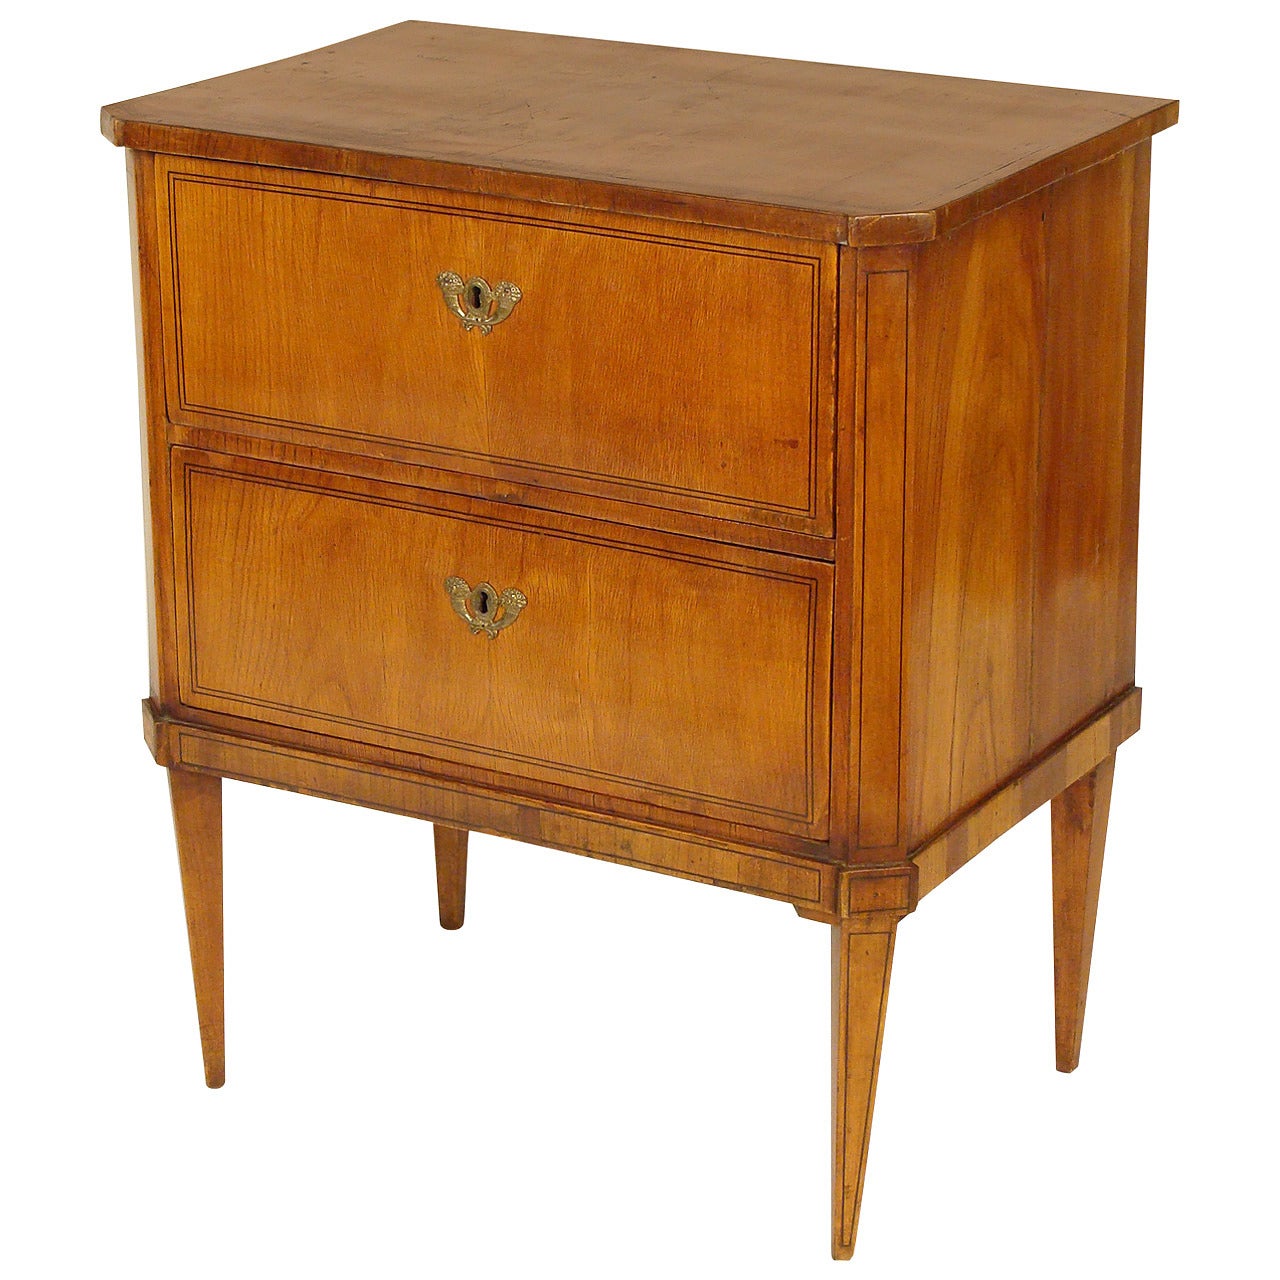 Continental neo classical chest of drawers